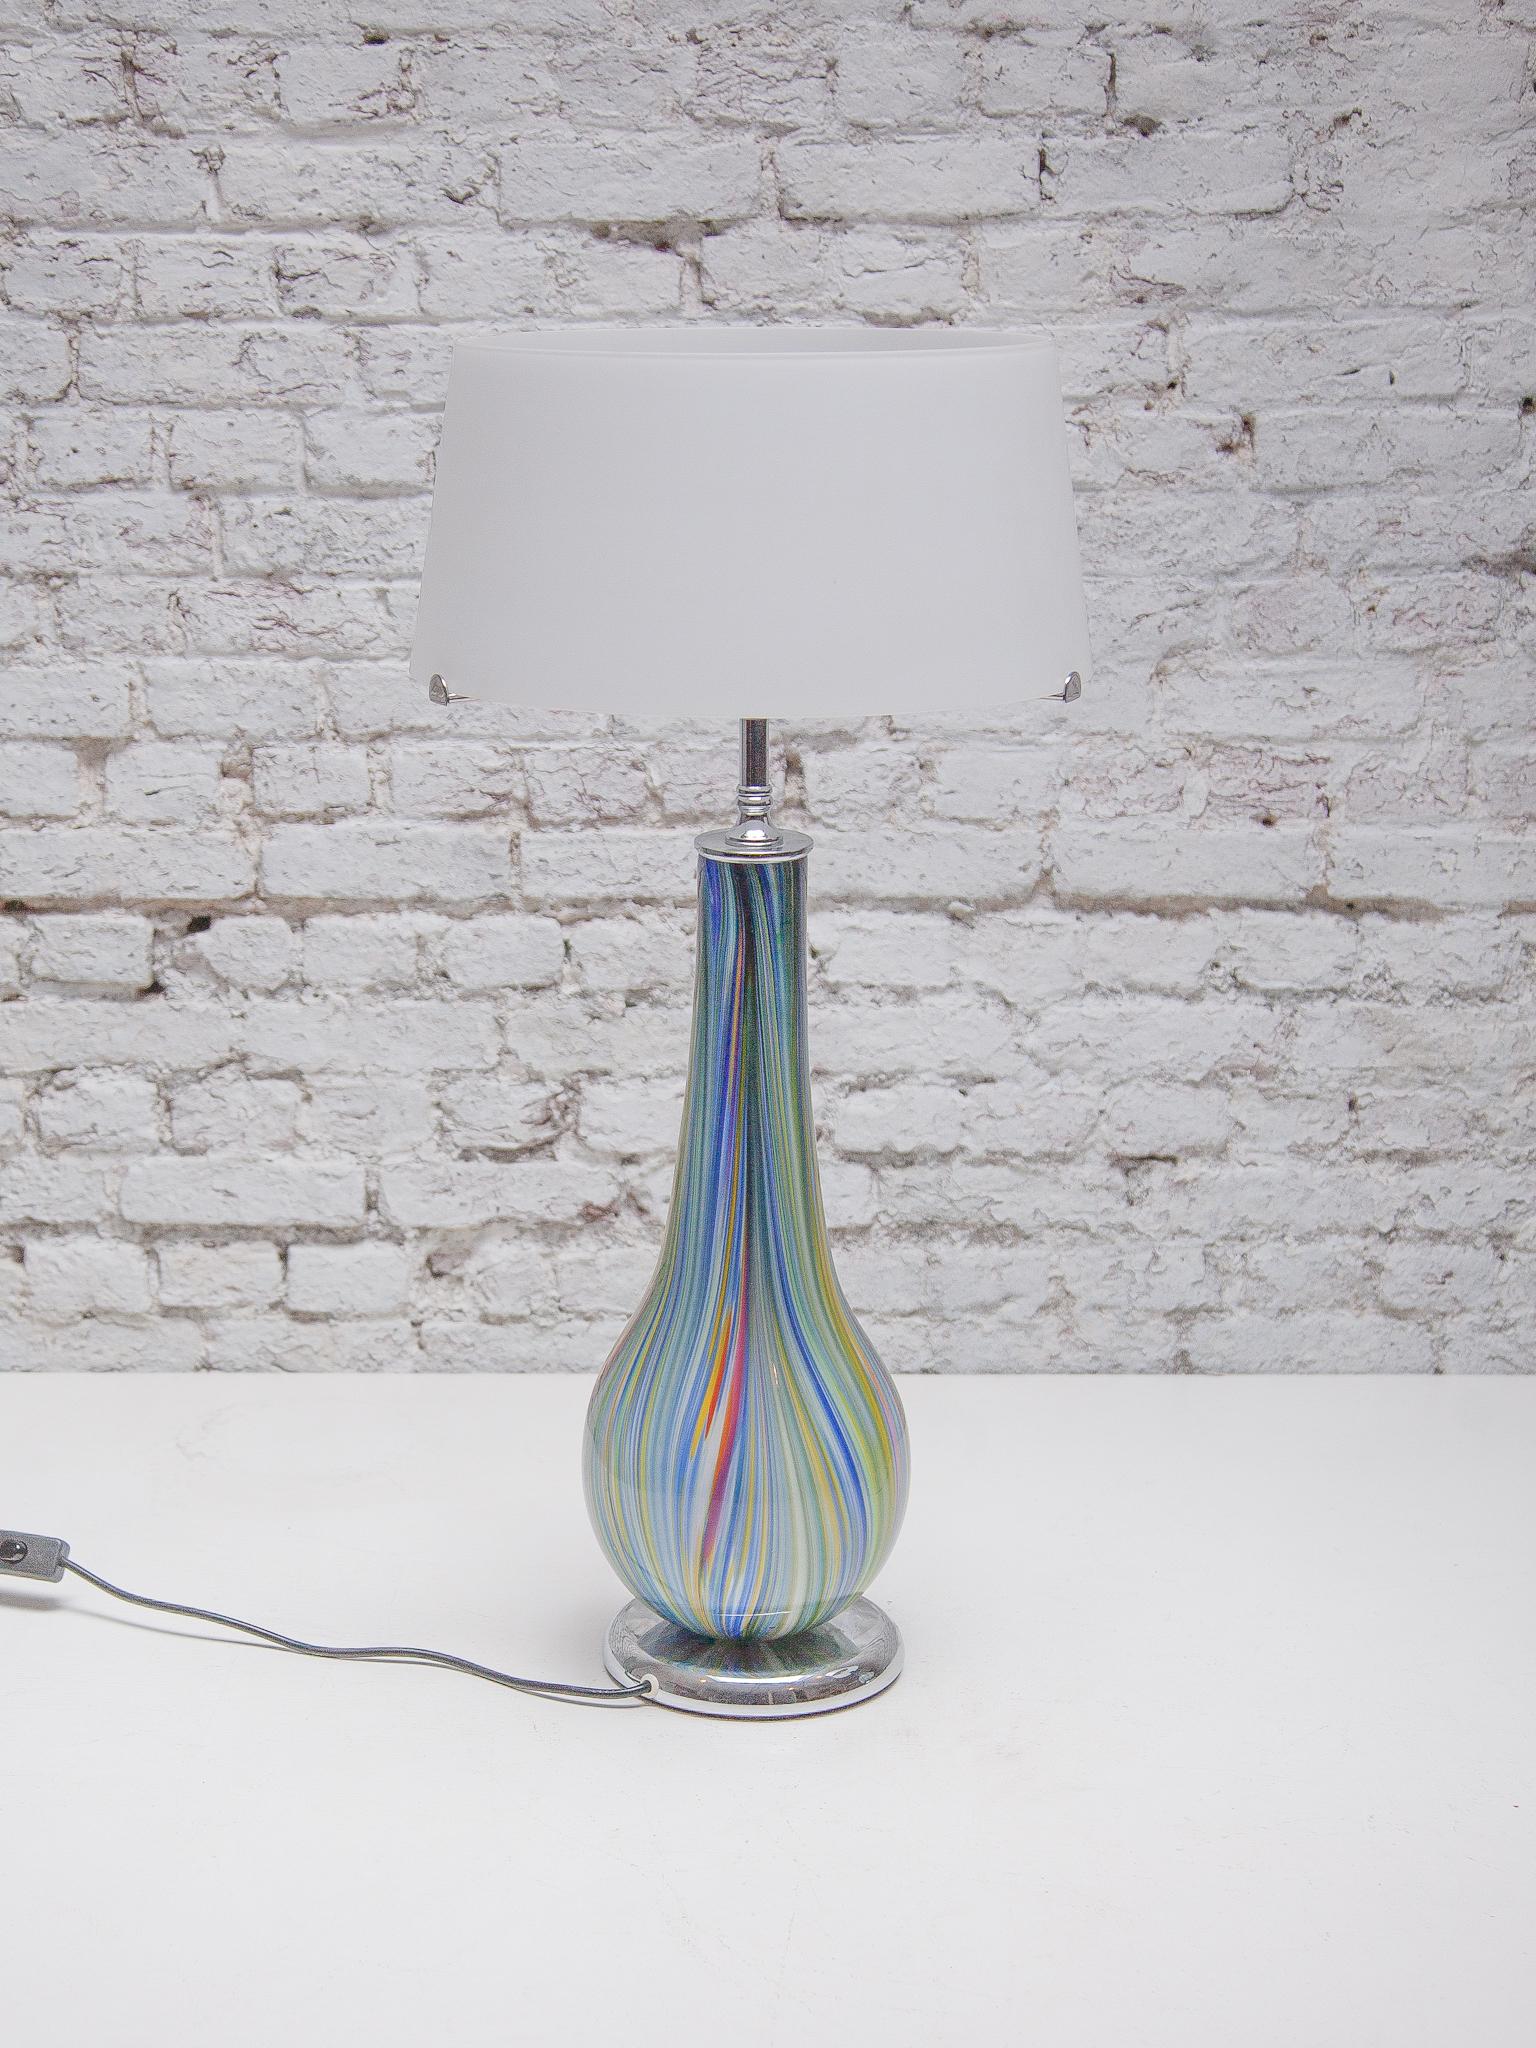 Italian Set of Two Murano Multi Colored Opaline Table Lamps designed by Barbini, 1980s For Sale